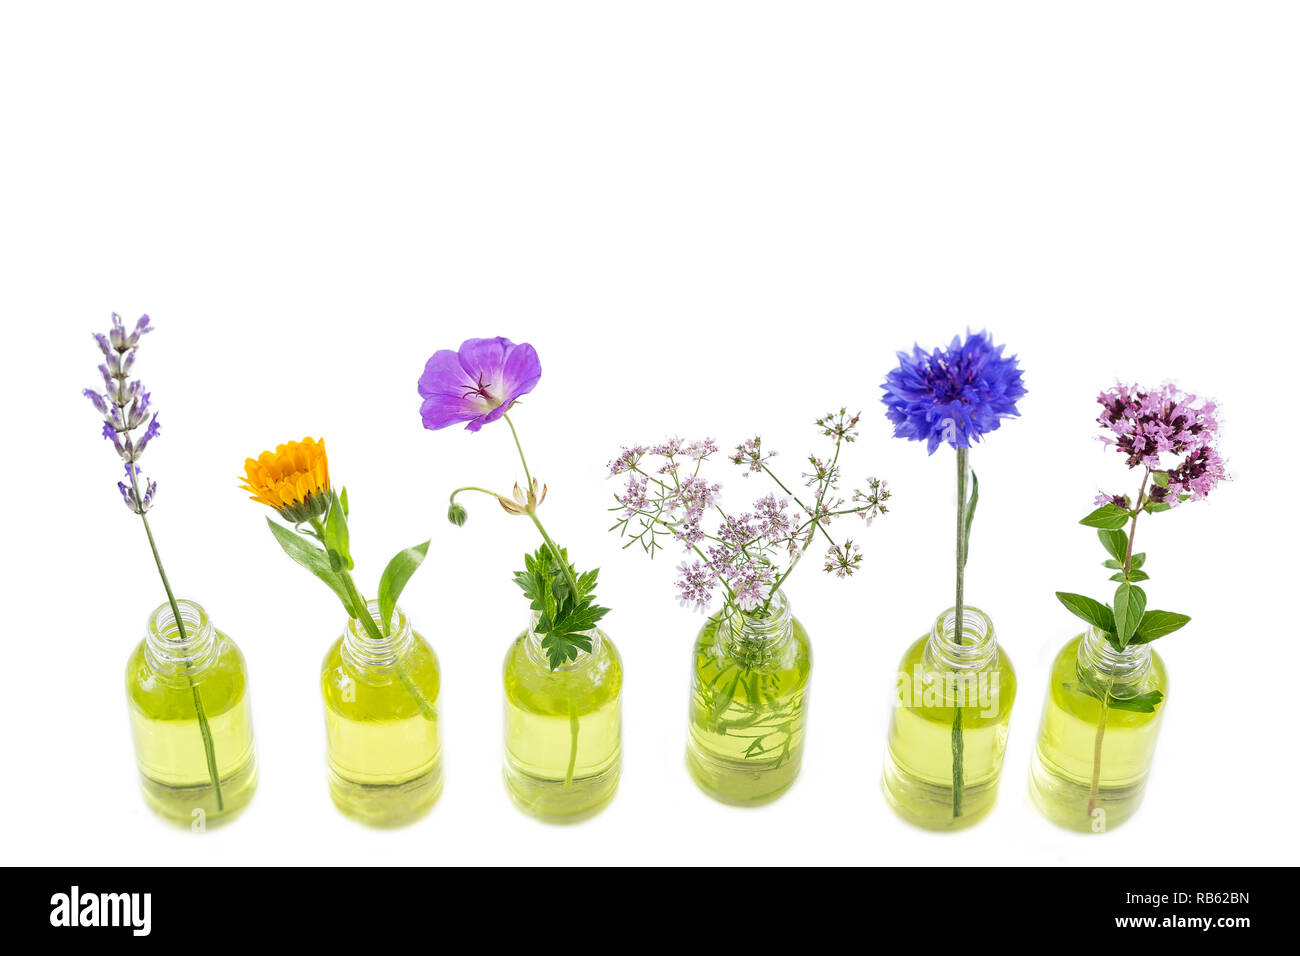 Different healing flowers in small glass bottles on white Stock Photo